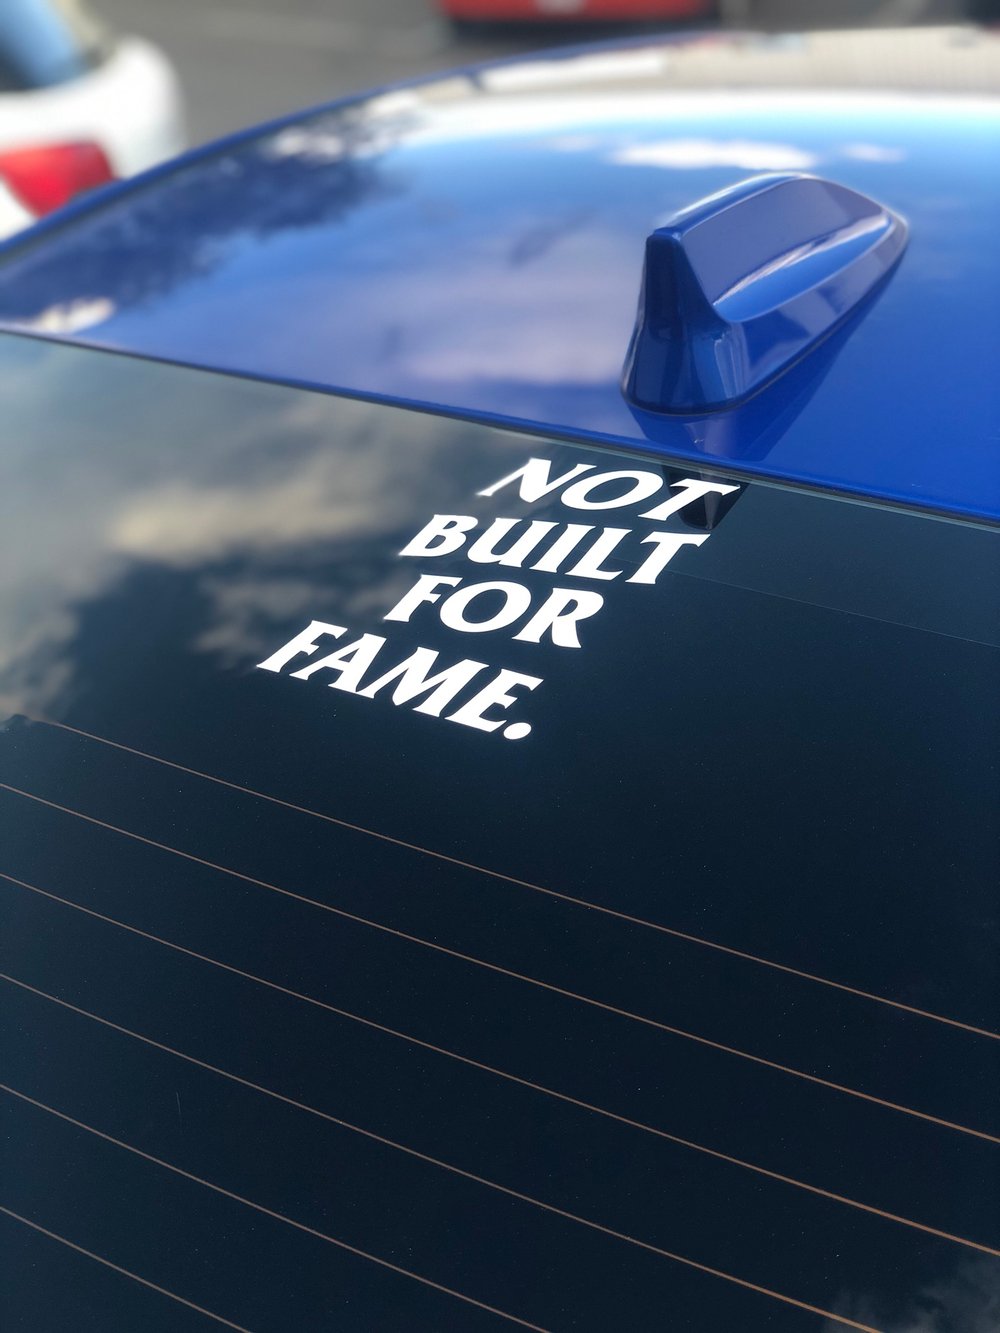 Image of “Not Built For Fame” Decal 